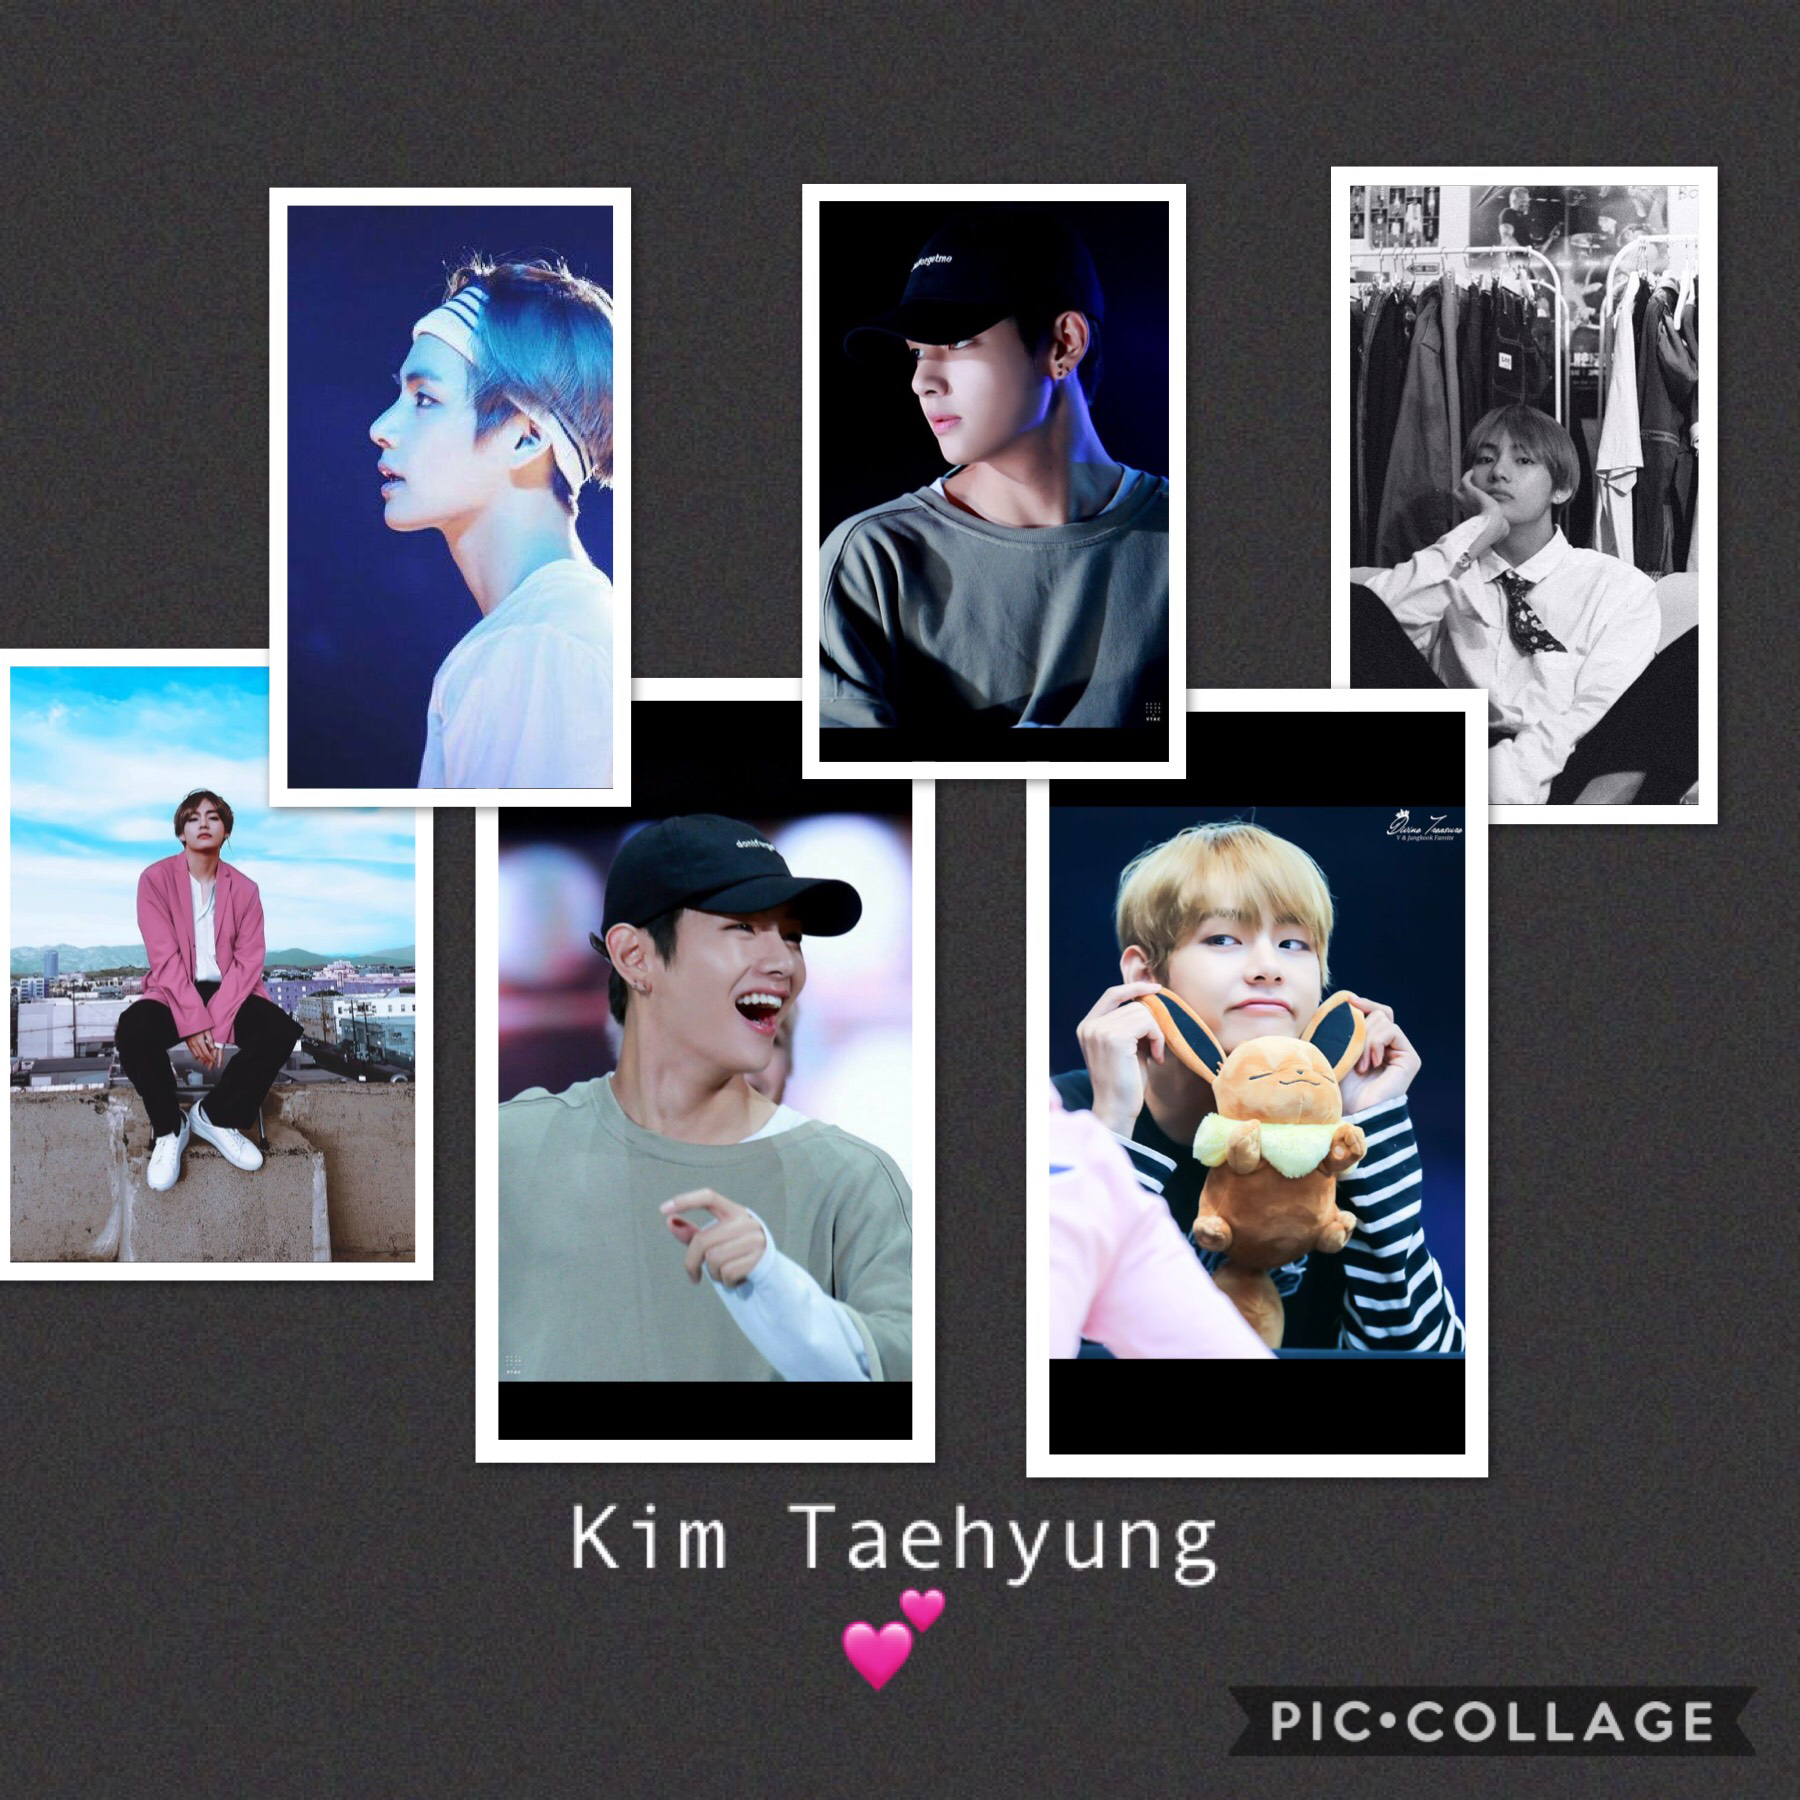 Kim Taehyung 🖤
Vocalist and Bangtan’s kind support and beauty.